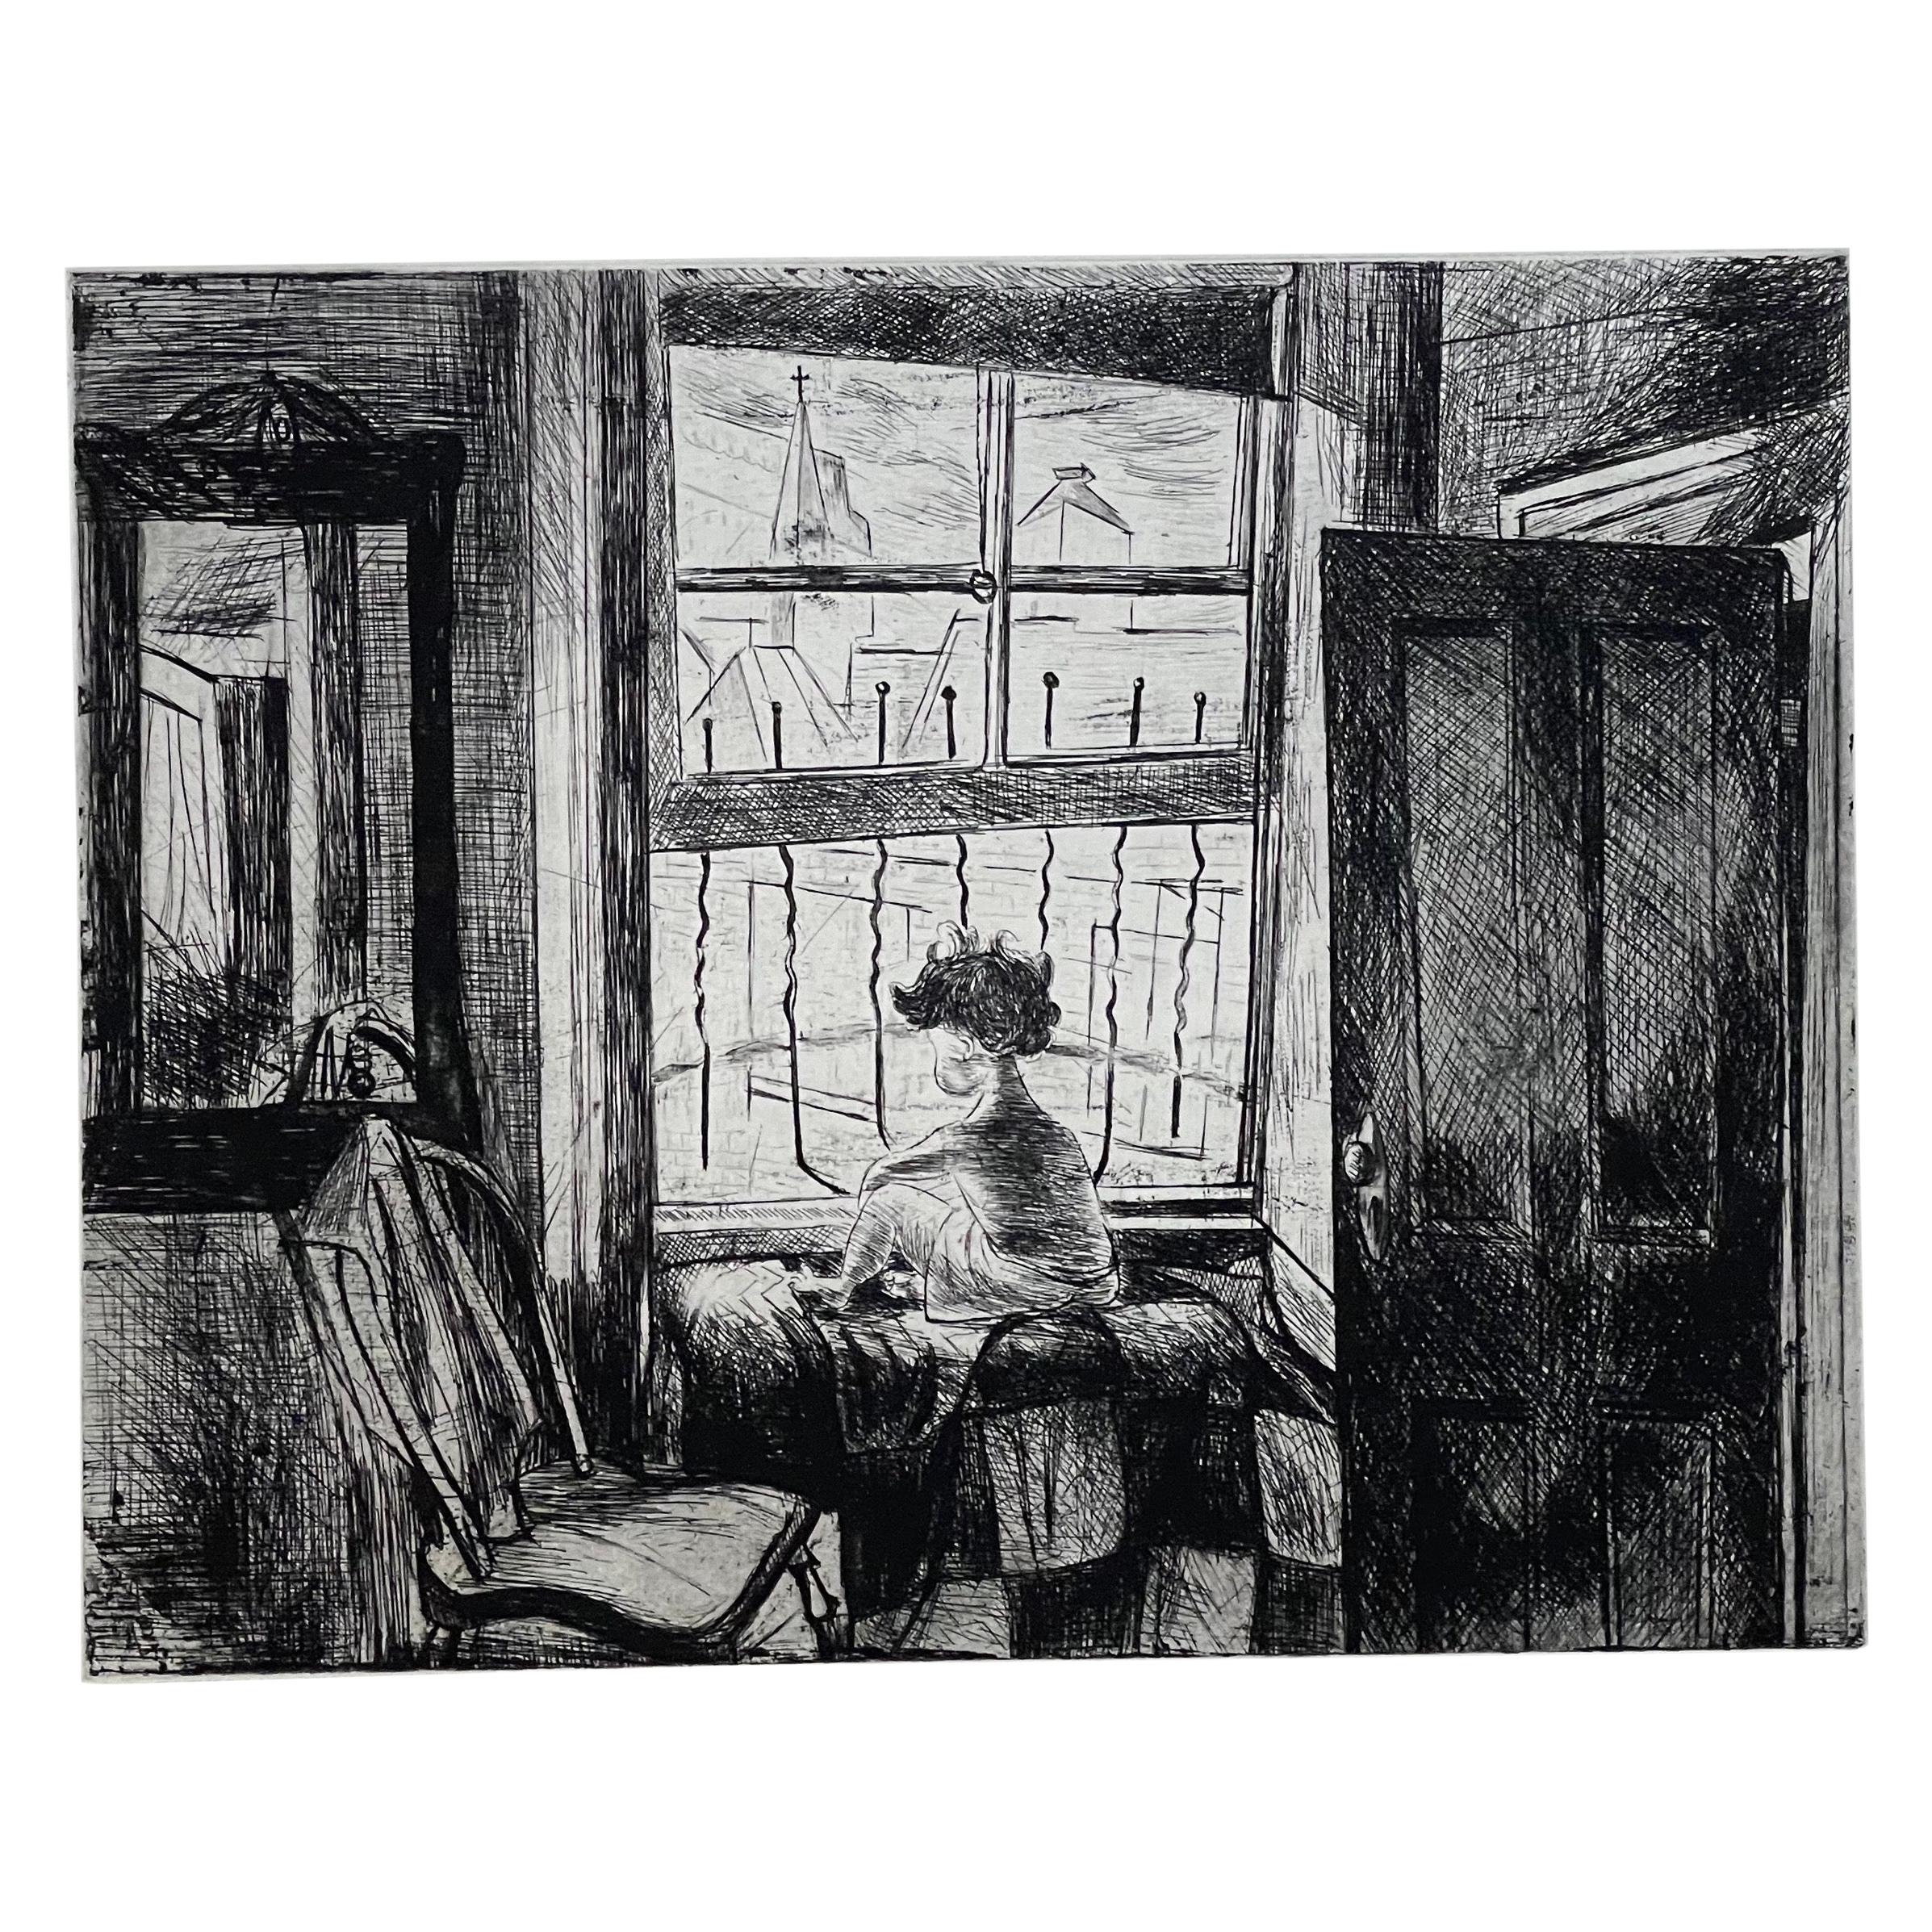 Images of Children Etching Entitled "City Child" by Will Barnet For Sale